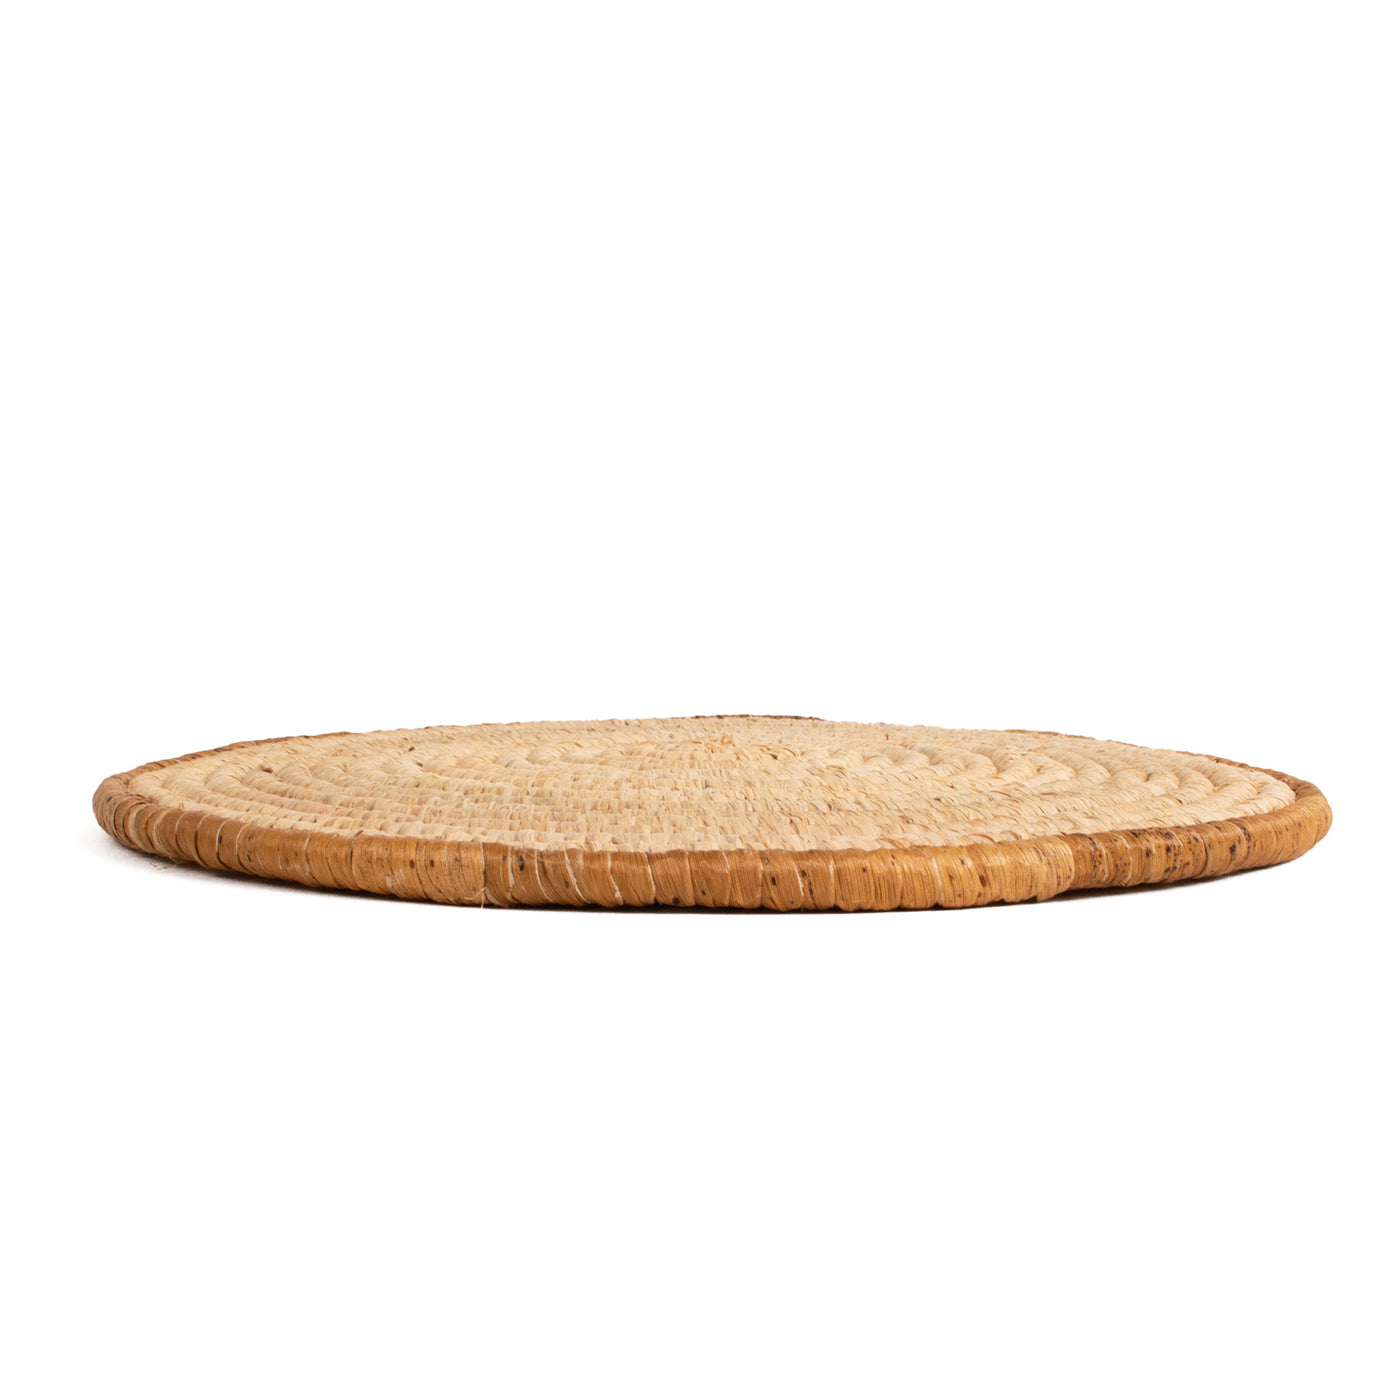 Town Square Table Plate - 10" Rustic Bark